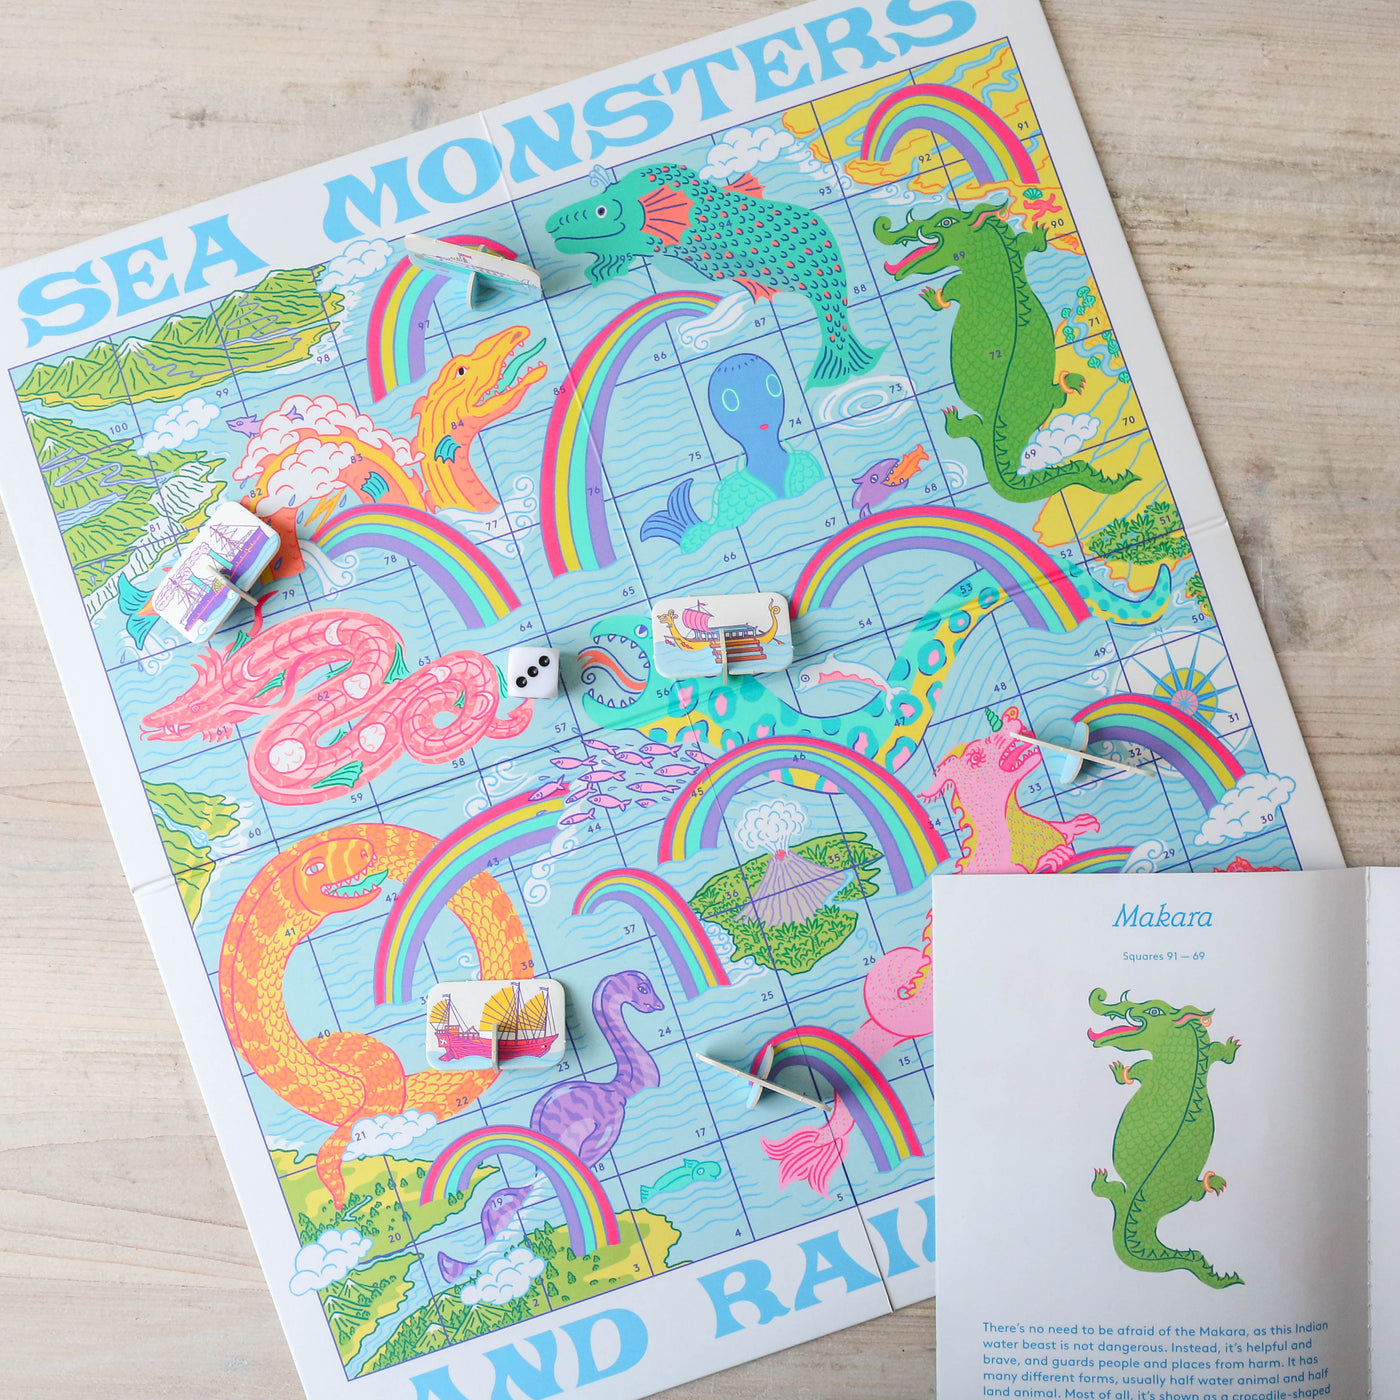 Sea Monsters & Rainbows : A Snakes & Ladders Game